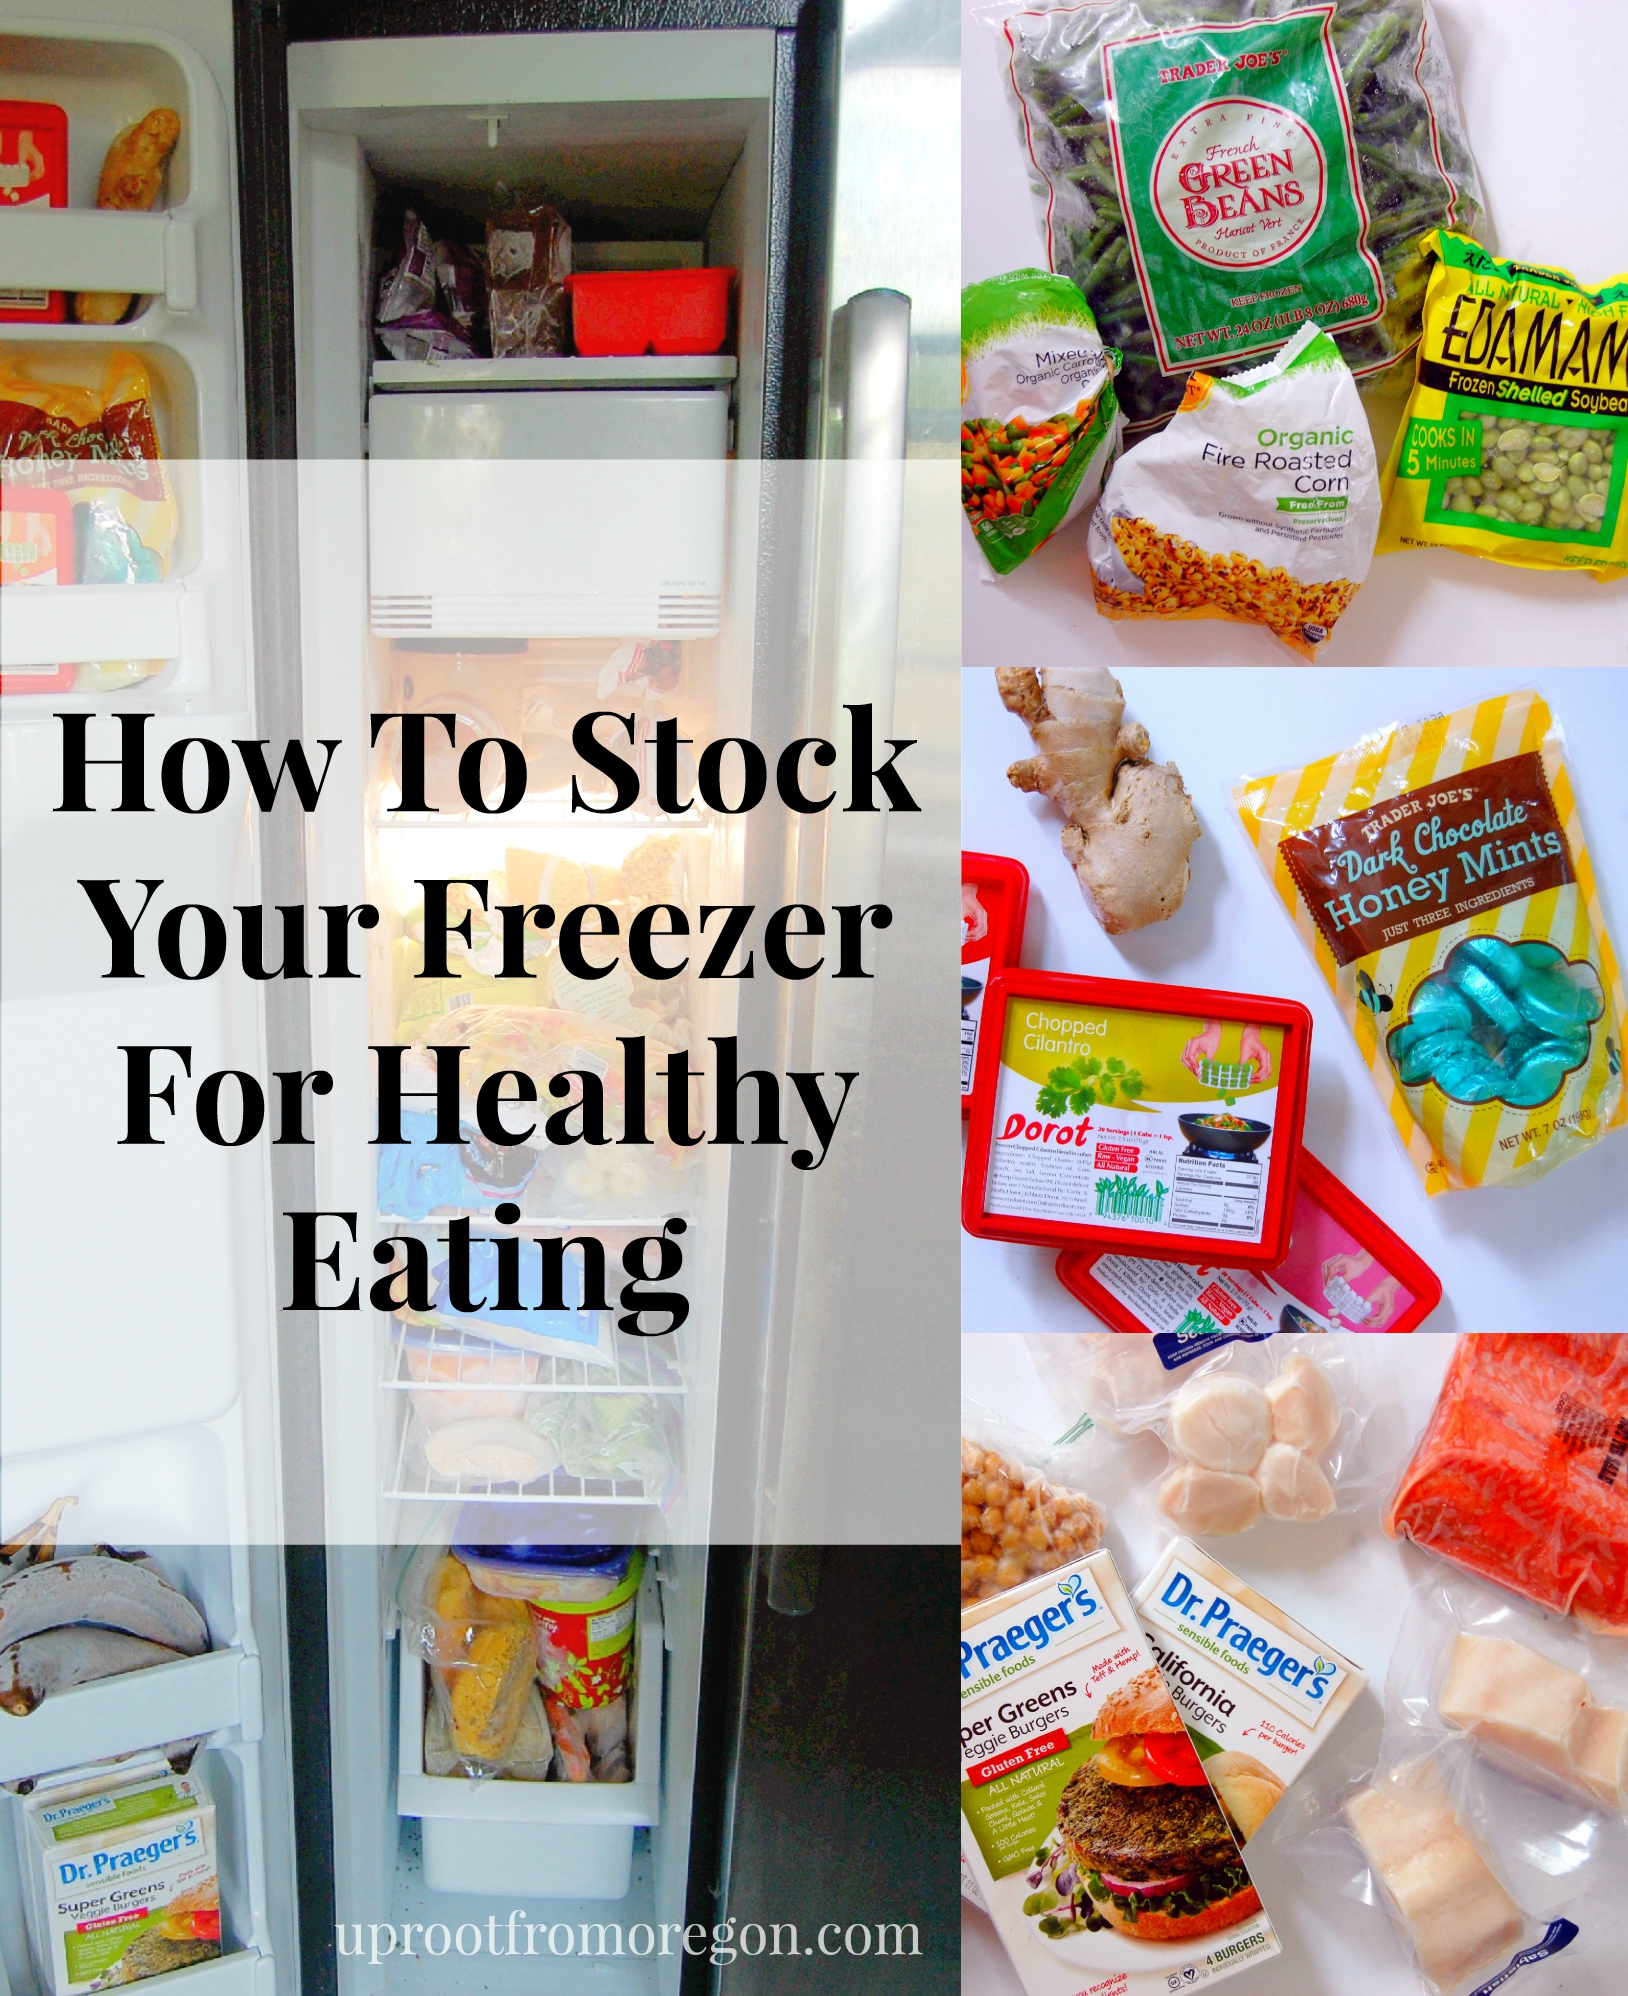 Choosing Healthy Freezer Pops - Feed Them Wisely